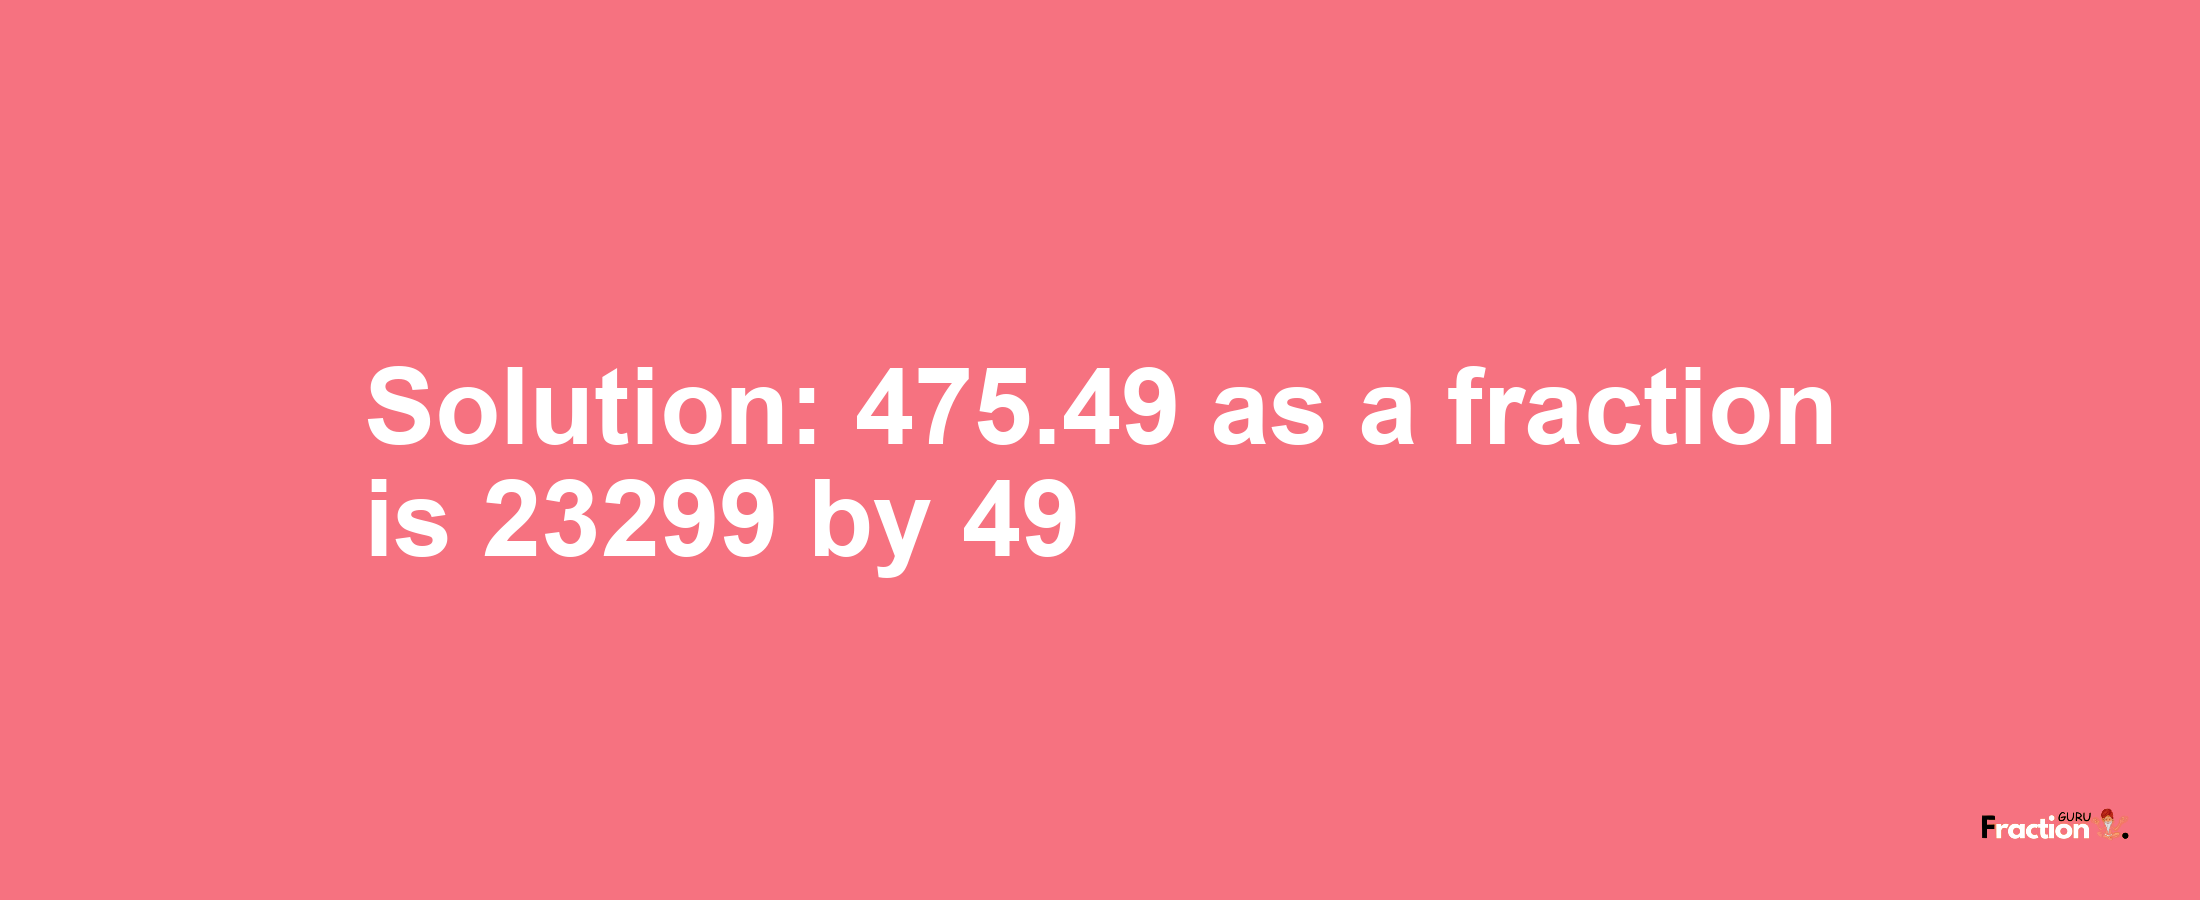 Solution:475.49 as a fraction is 23299/49